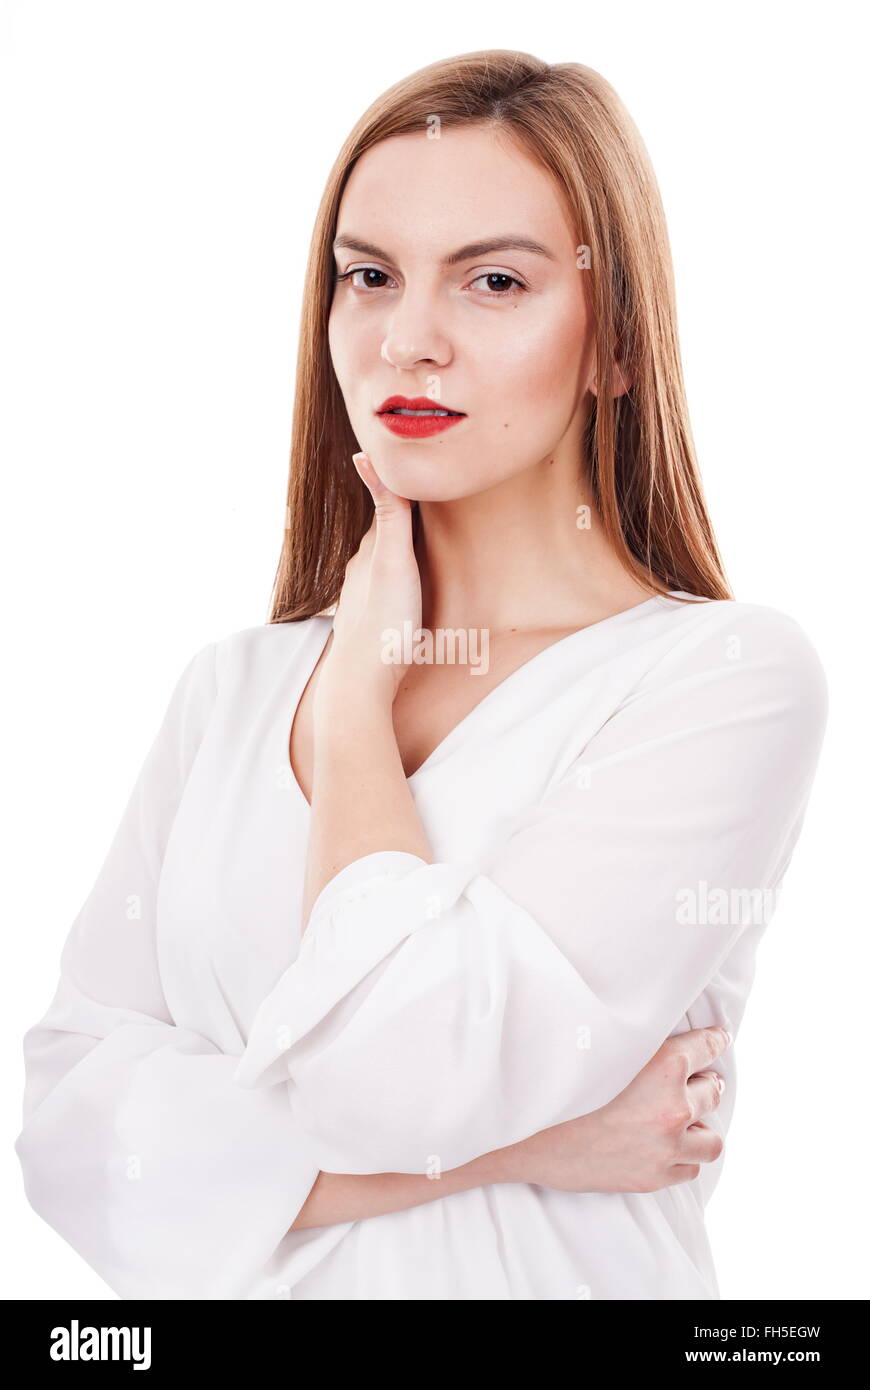 Serious young woman posing relaxed on white background Stock Photo